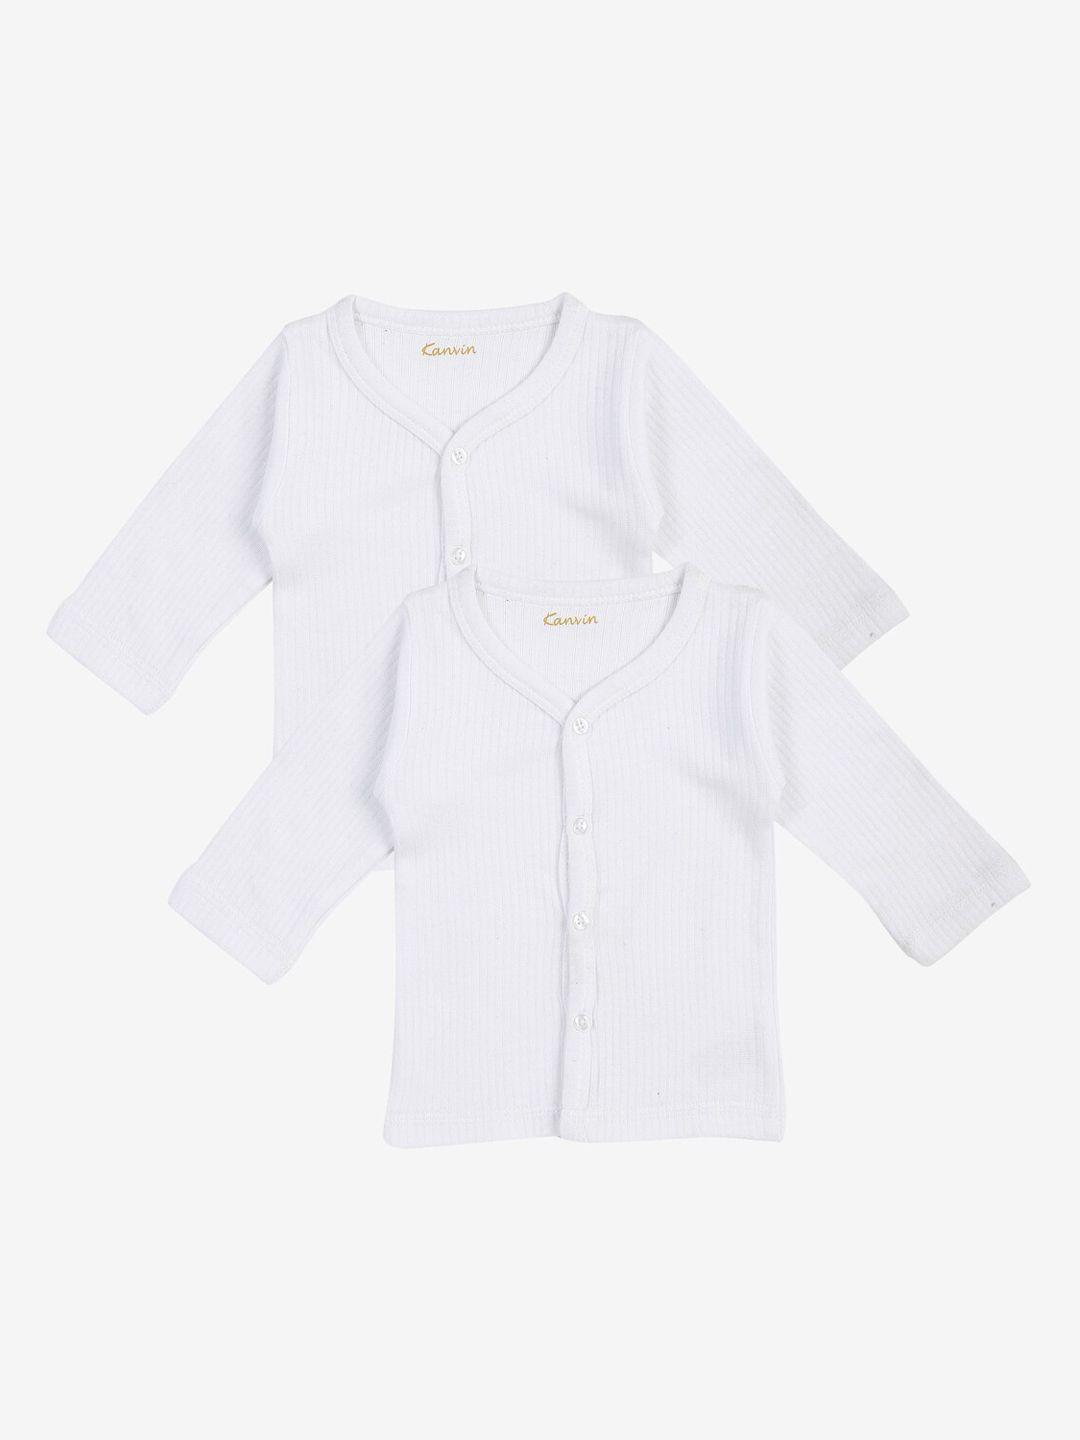 kanvin boys white set of 2 solid thermal tops